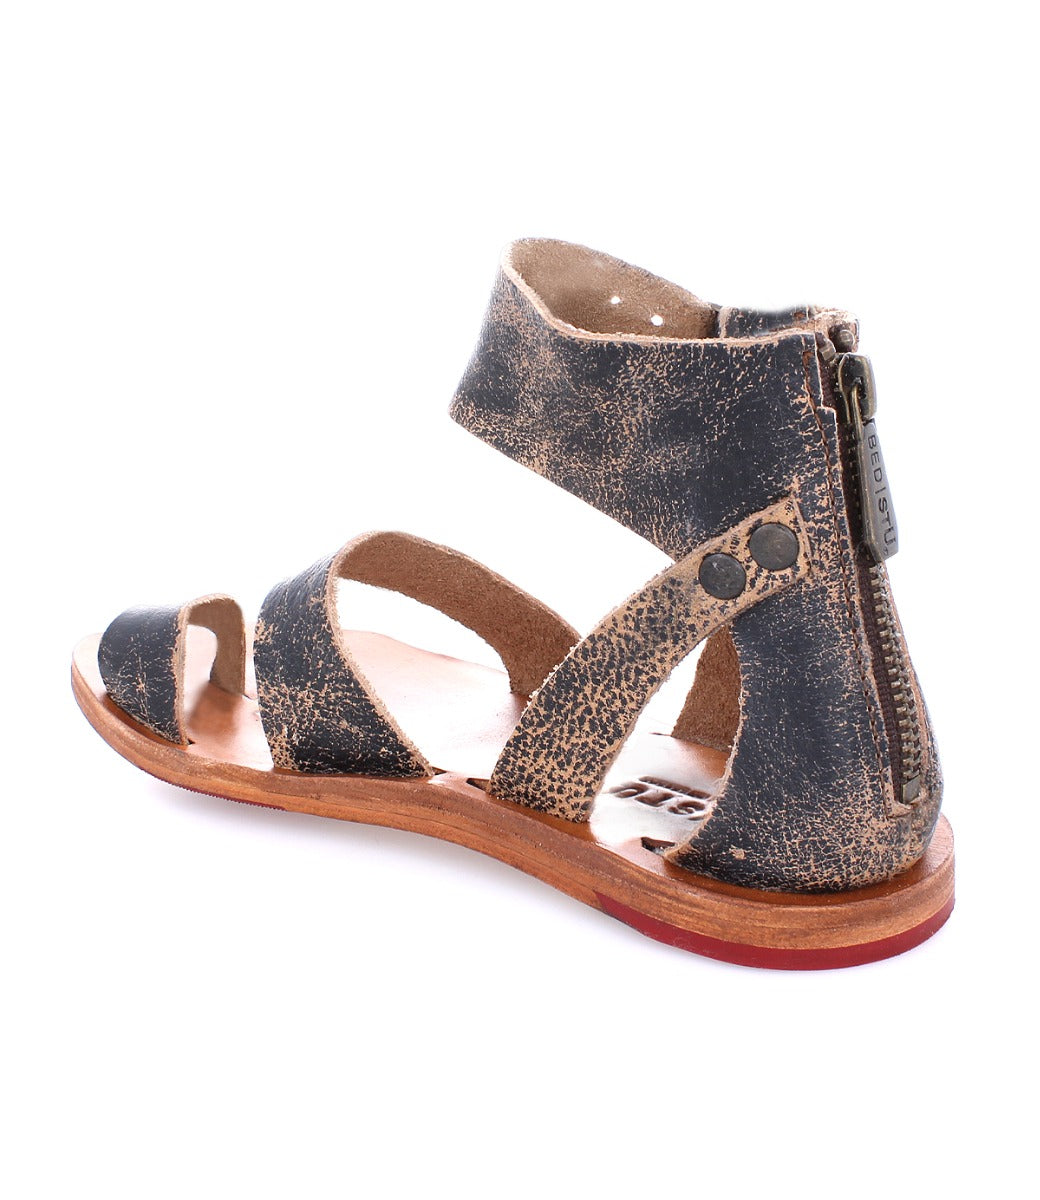 A women's Afrodita sandal by Bed Stu with a wooden sole.